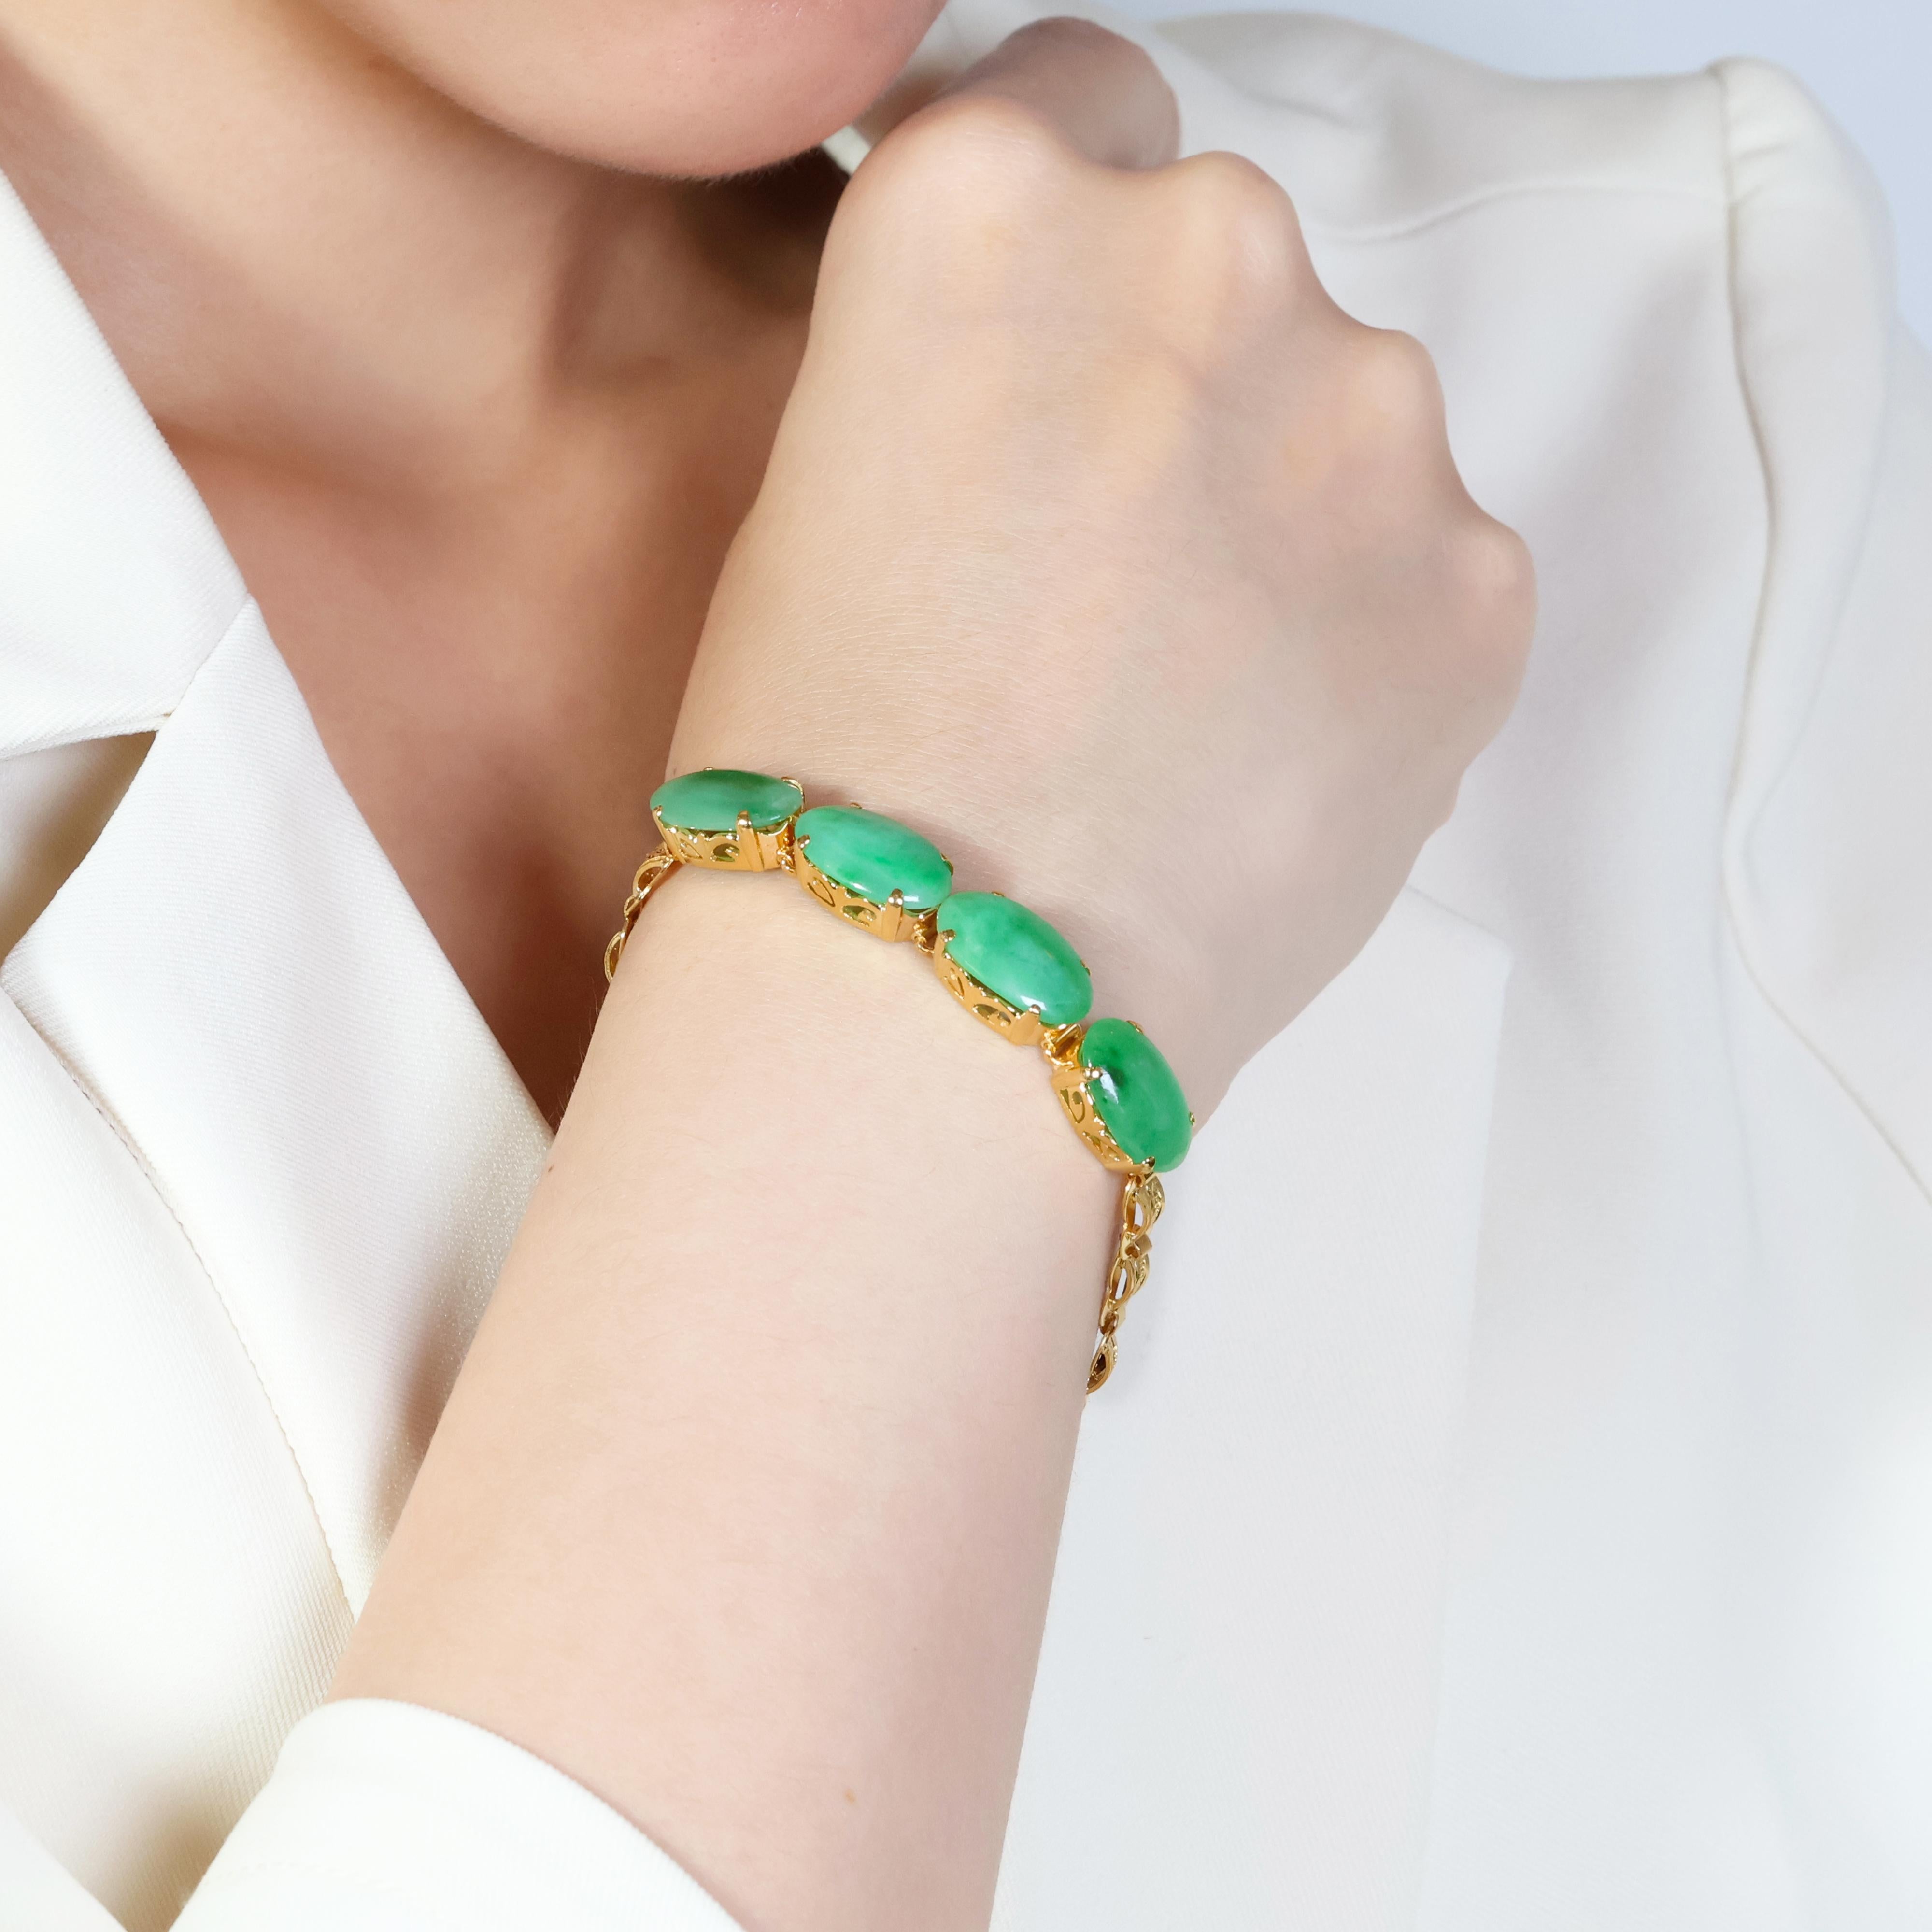 Unveiling a captivating 22K yellow gold bracelet adorned with four stunning jade cabochons. Each jade cabochon is meticulously carved into an elegant oval shape, boasting a captivating green color that will undoubtedly turn heads.  The combined